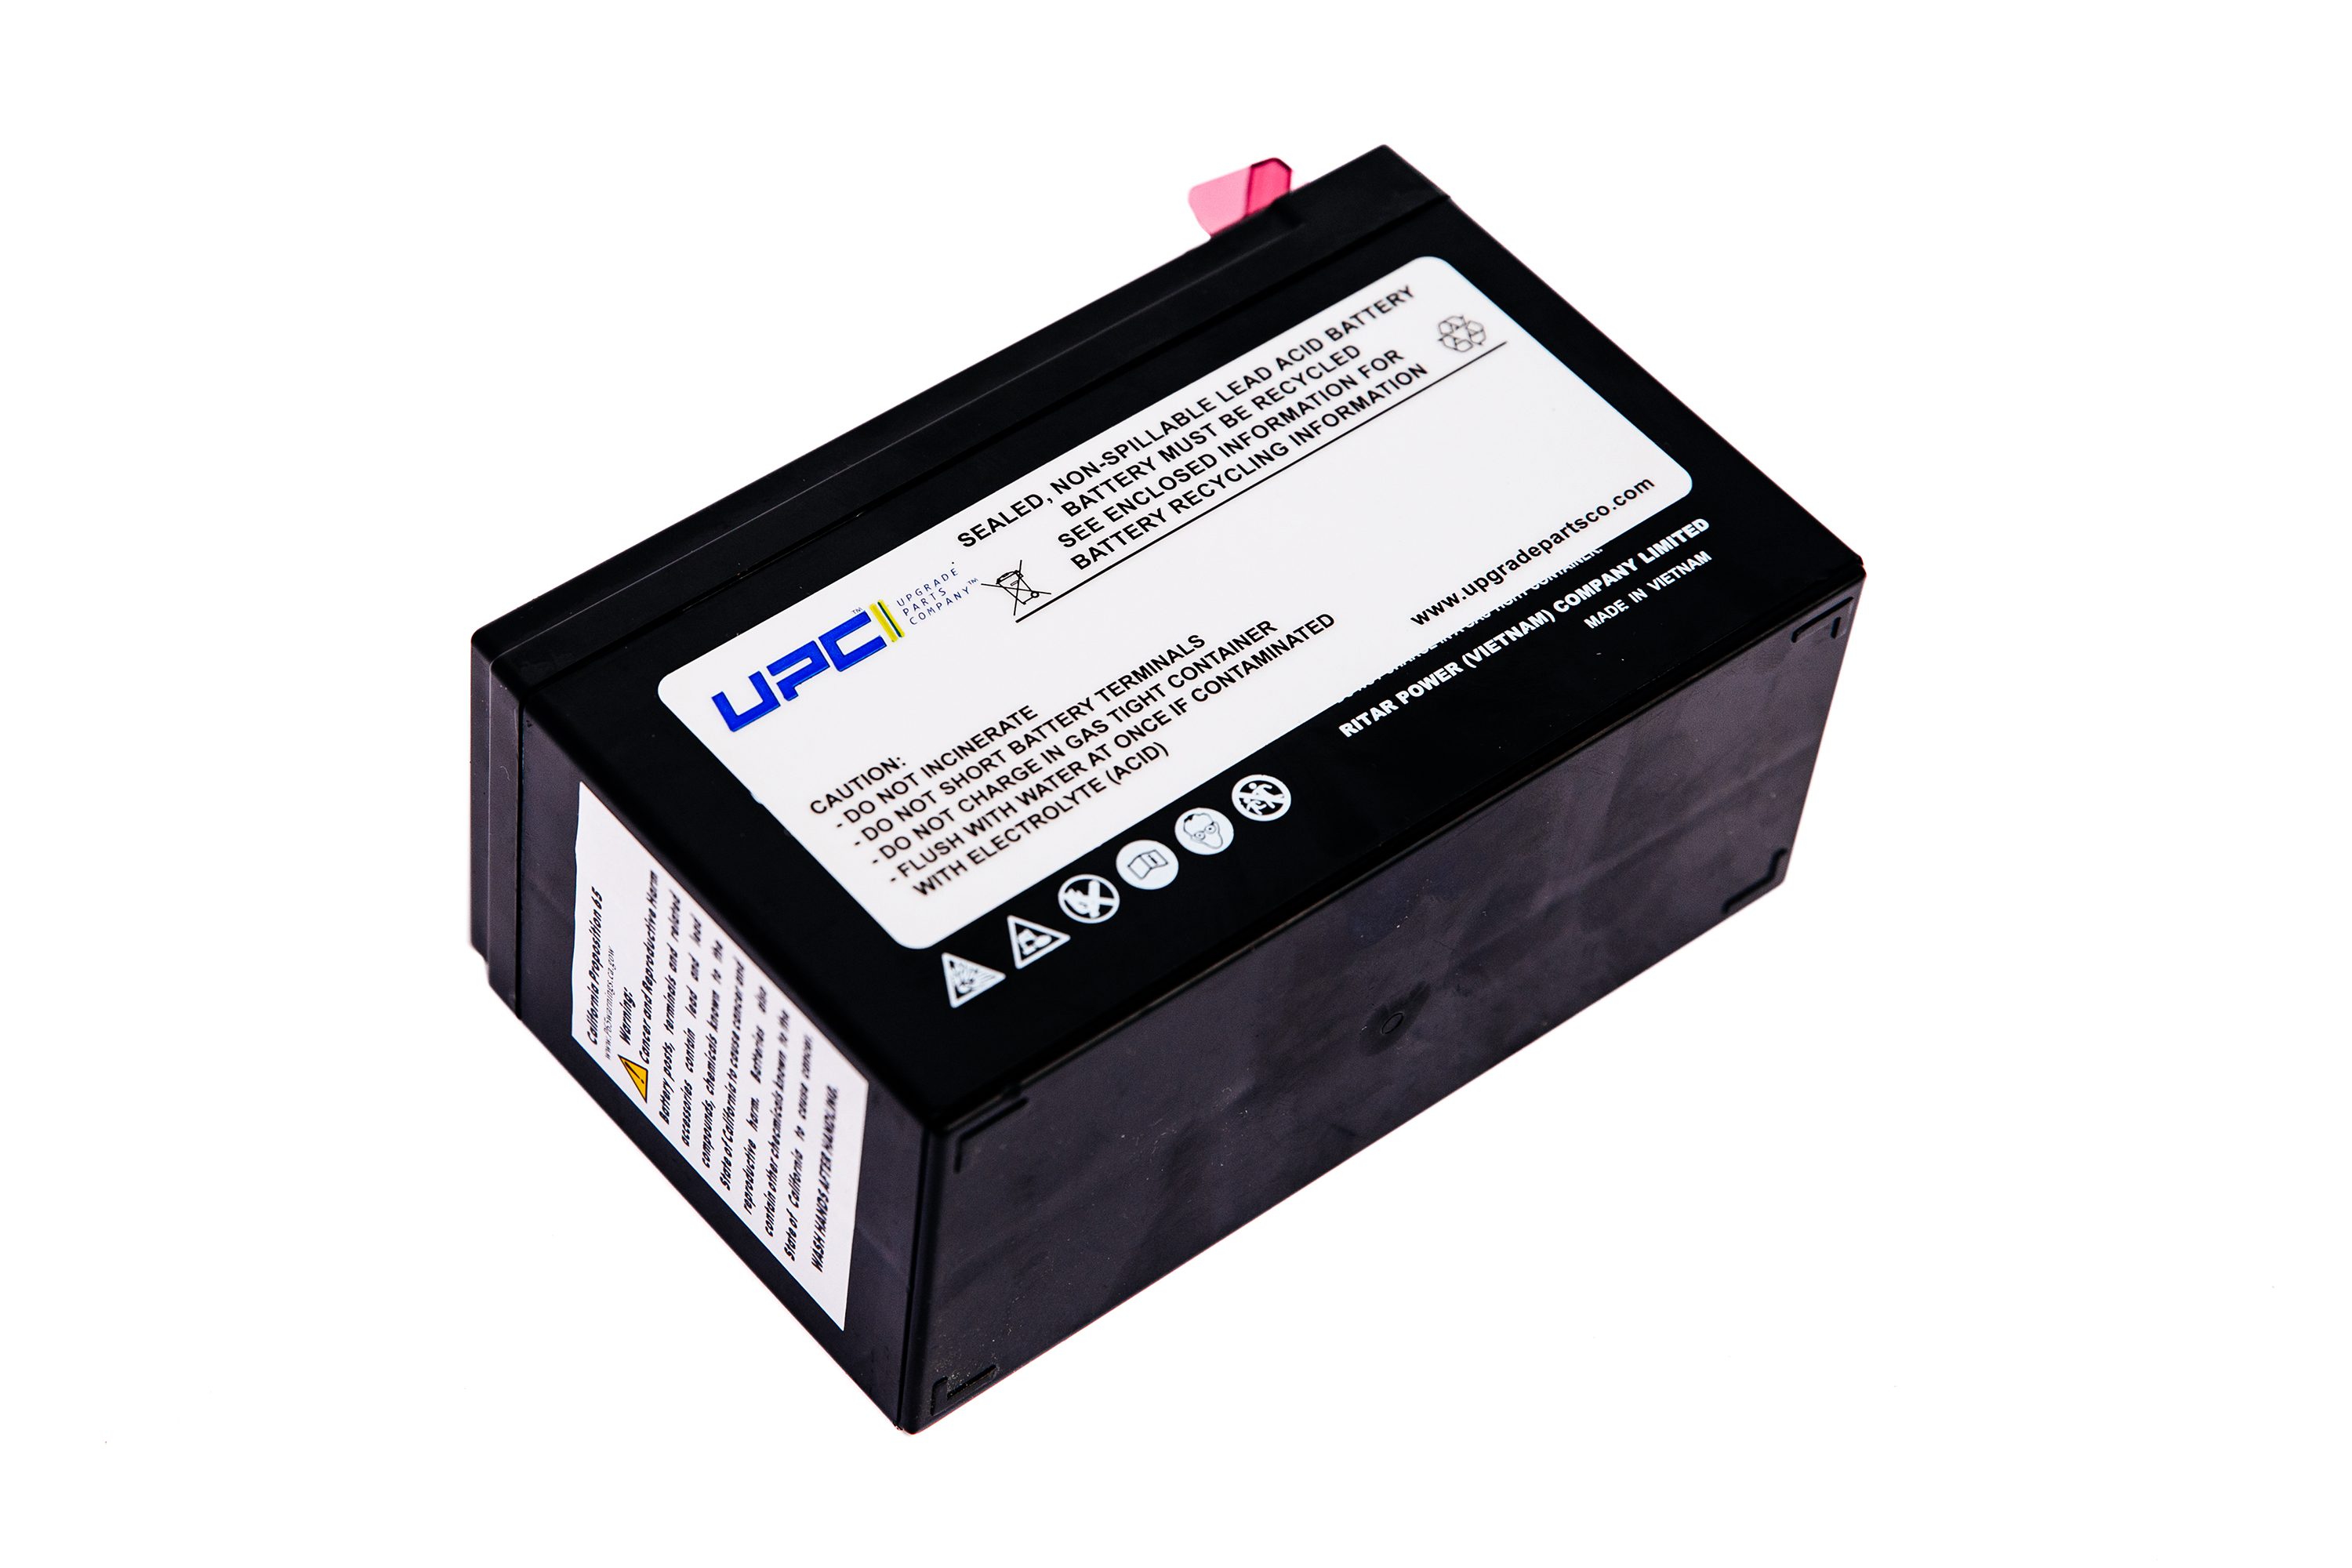 APCRBC114-UPC Replacement Battery for UPS Models BE450G, BN4001 - image 2 of 3